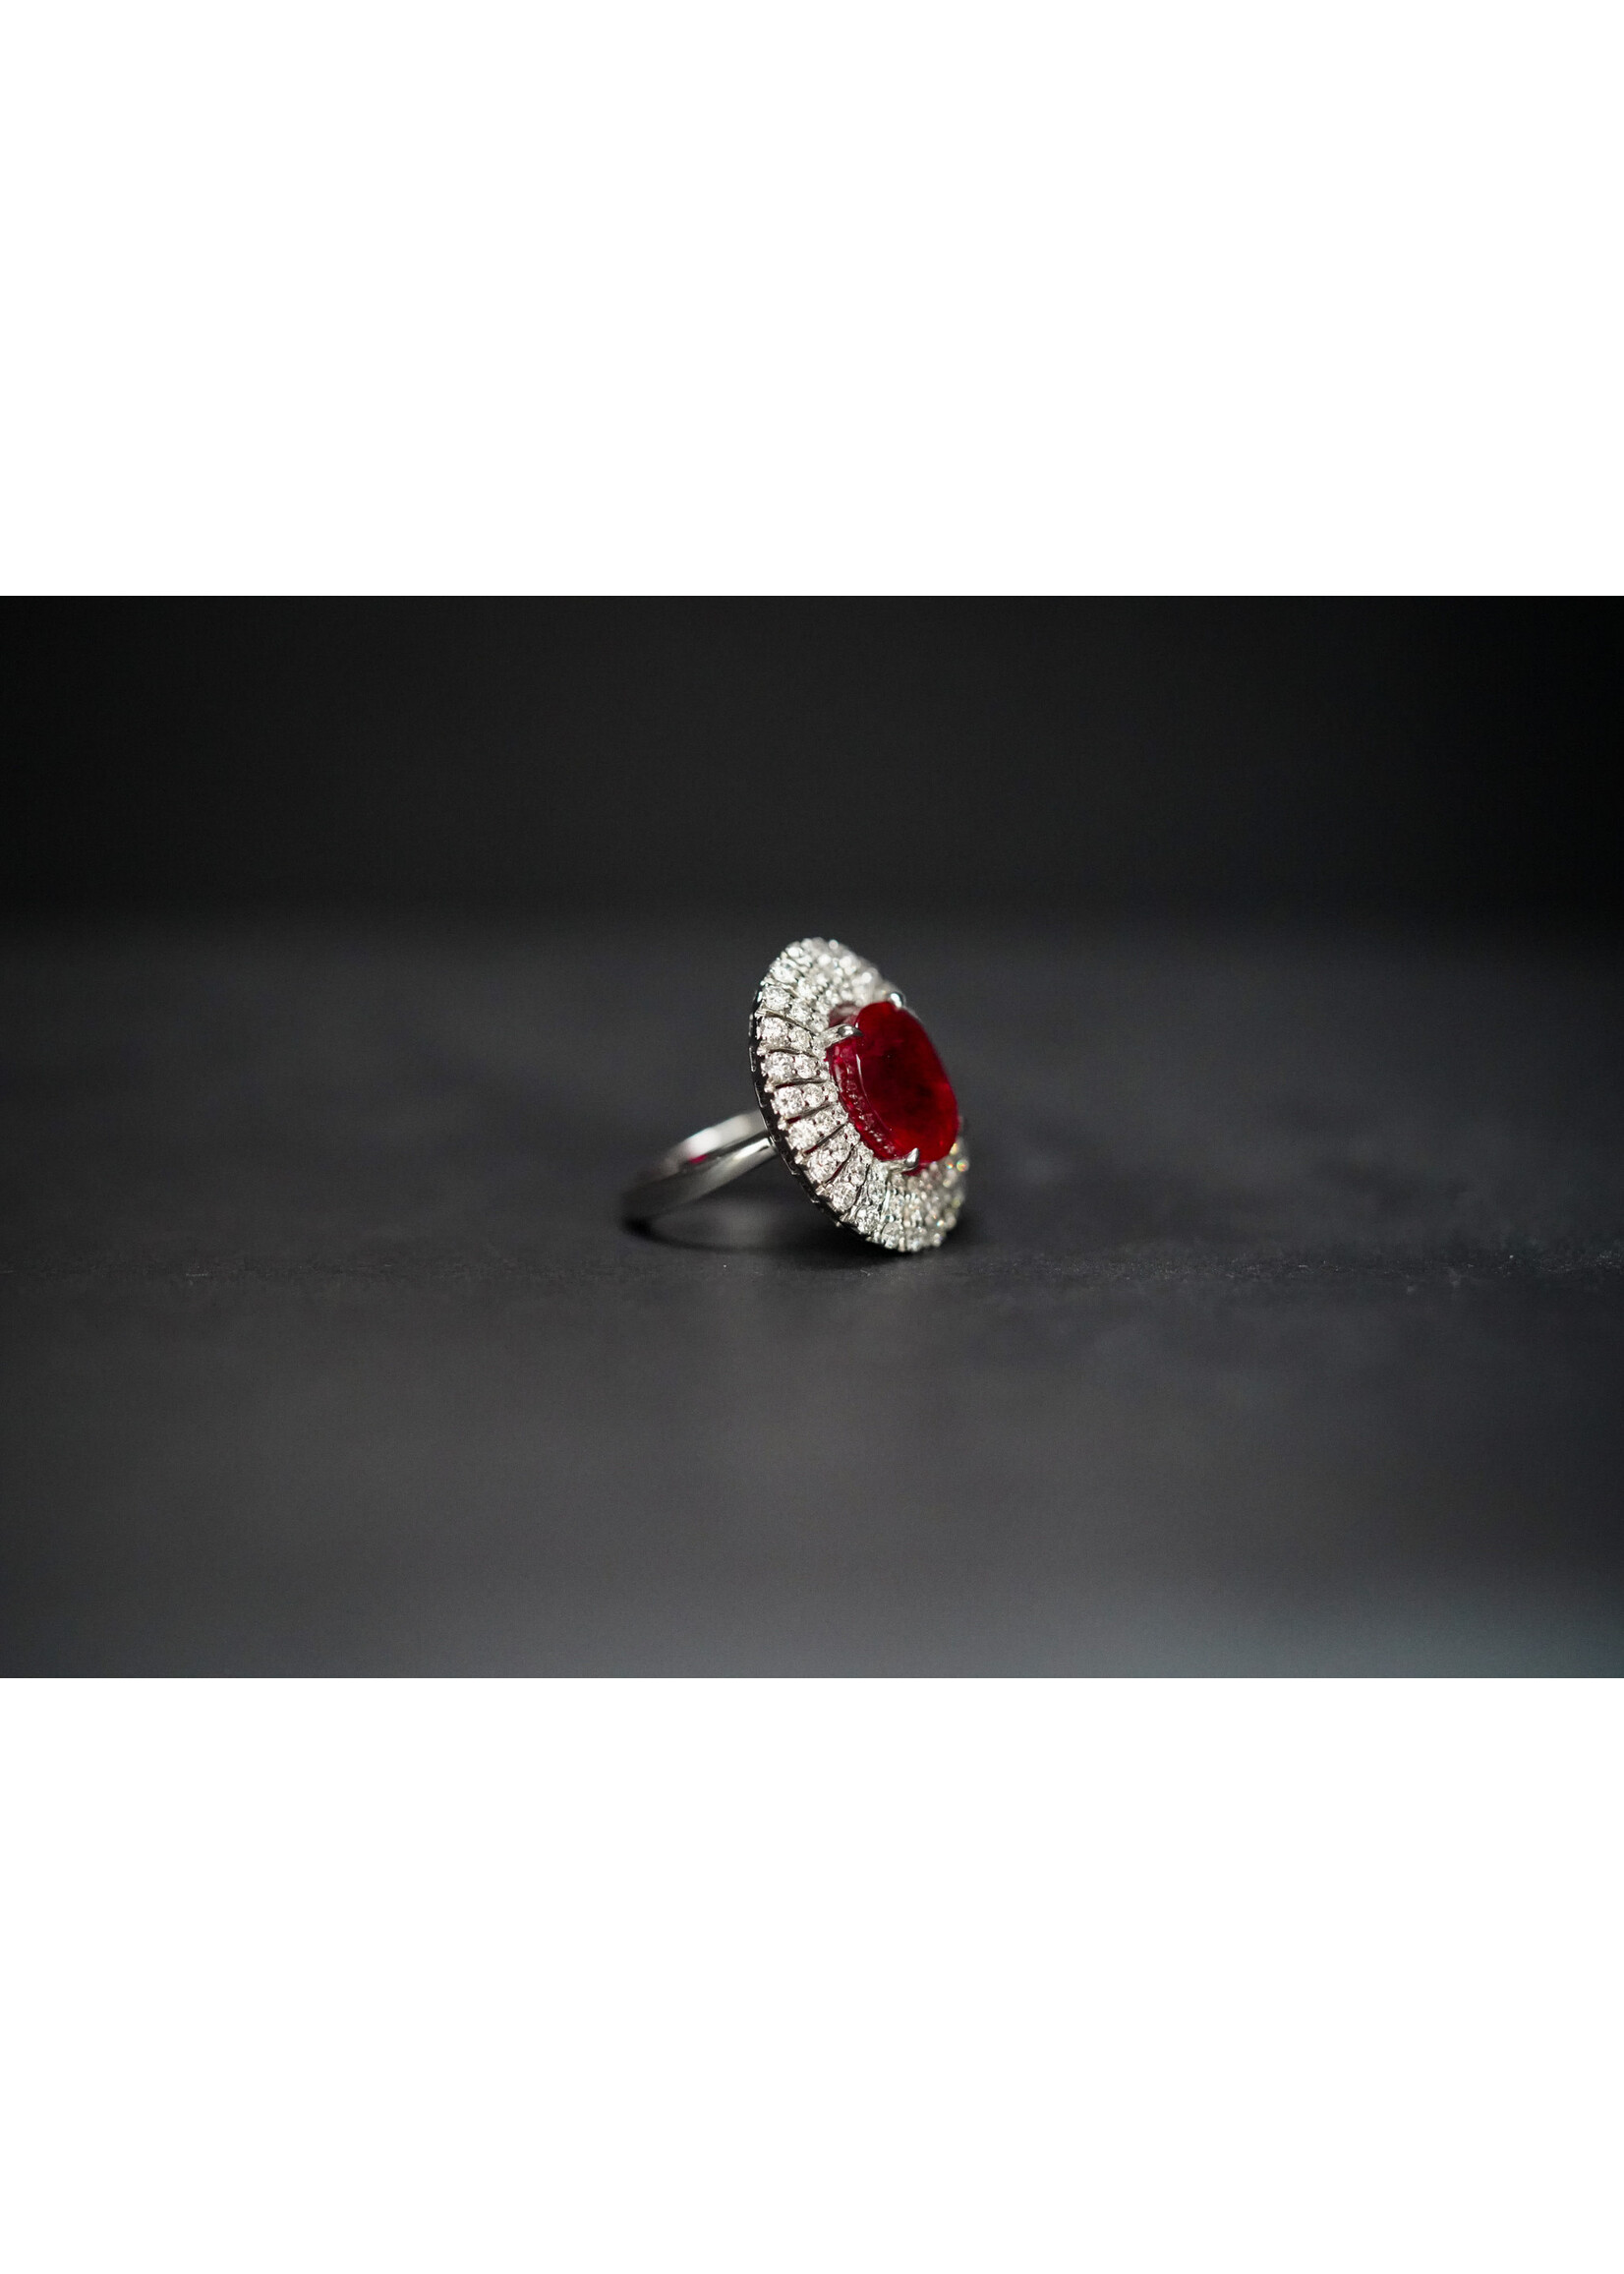 14KW 11.7g 12.81ctw (10.69ctr) Glass Filled Ruby & Diamond Fashion Ring (size 6.5)